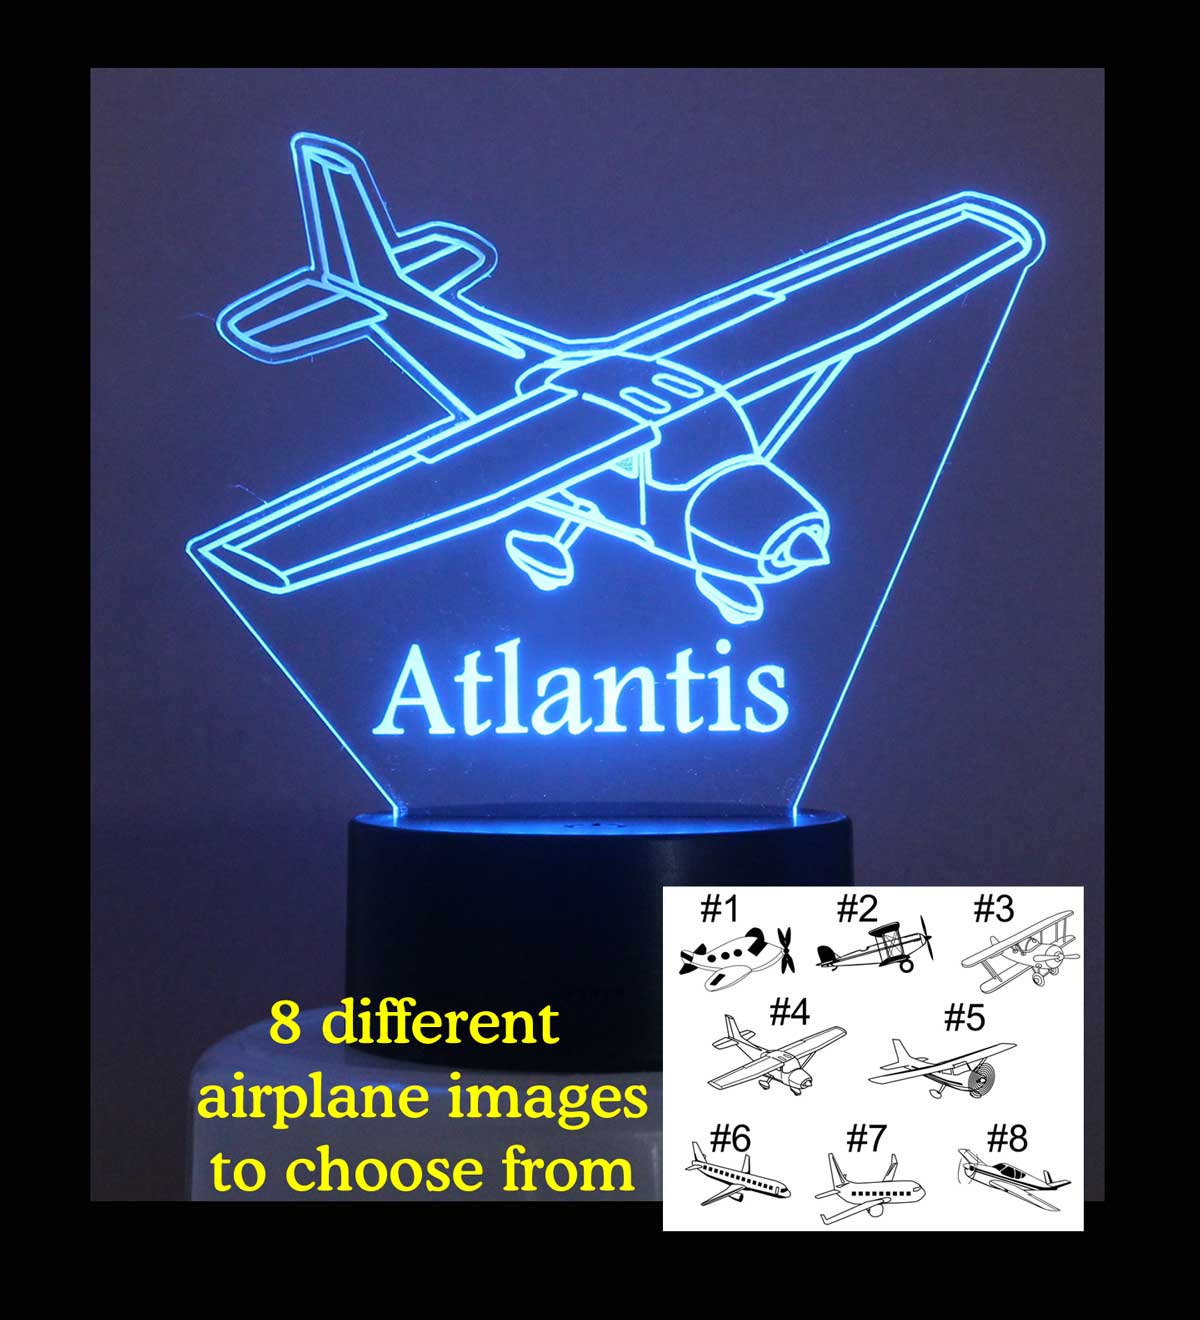 Airplane night light Personalized USB/110V/240V battery operated